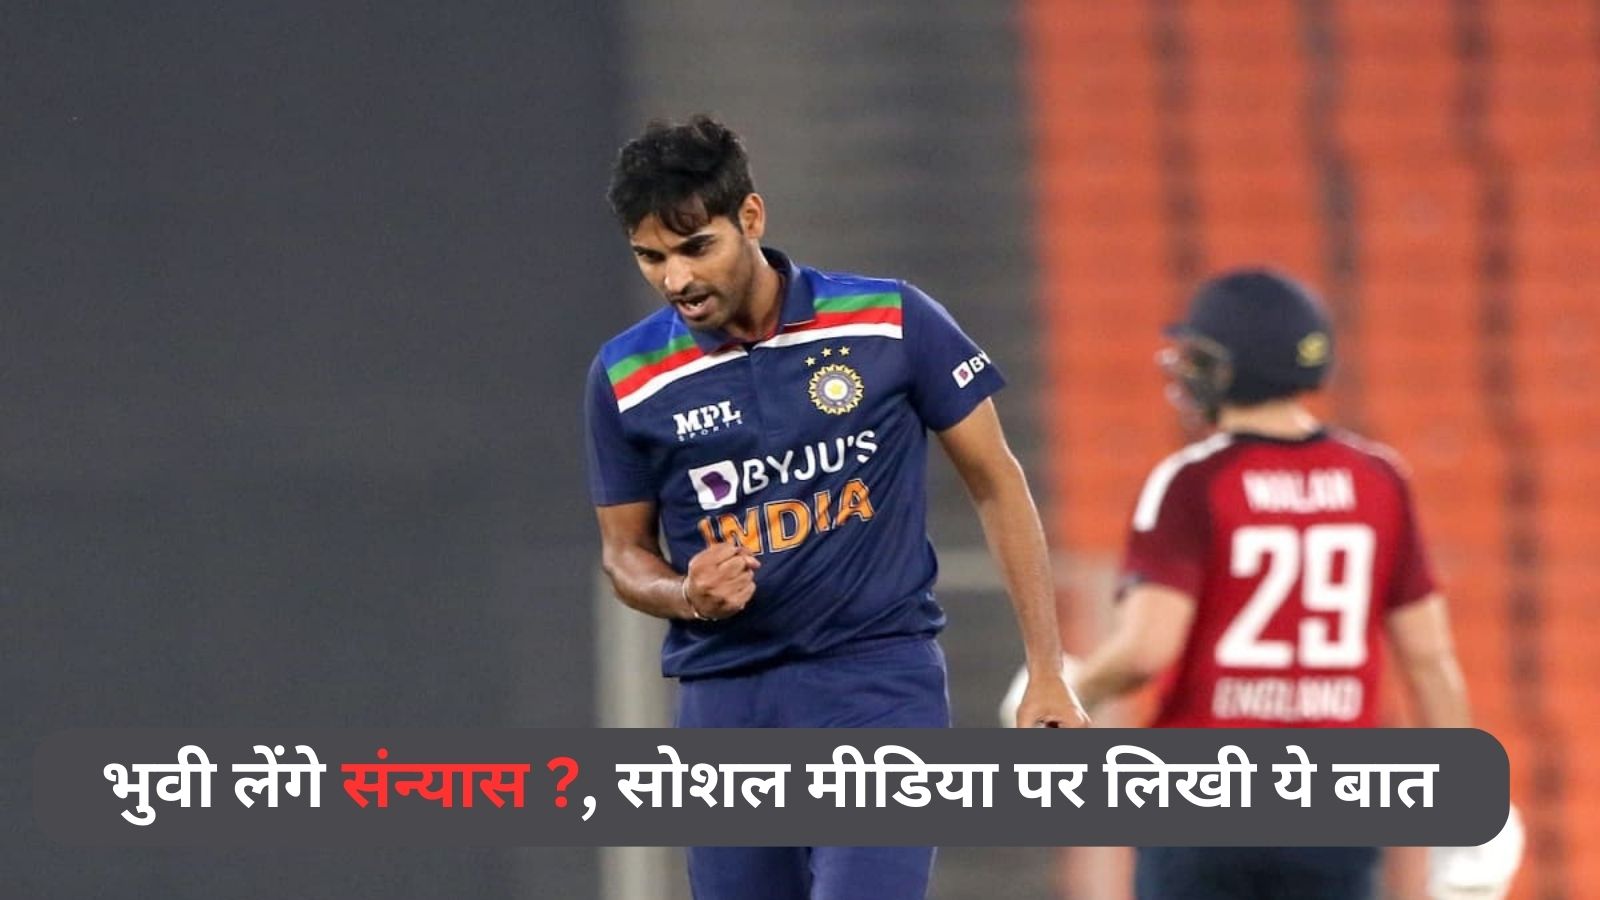 Bhuvi will retire wrote this thing on social media